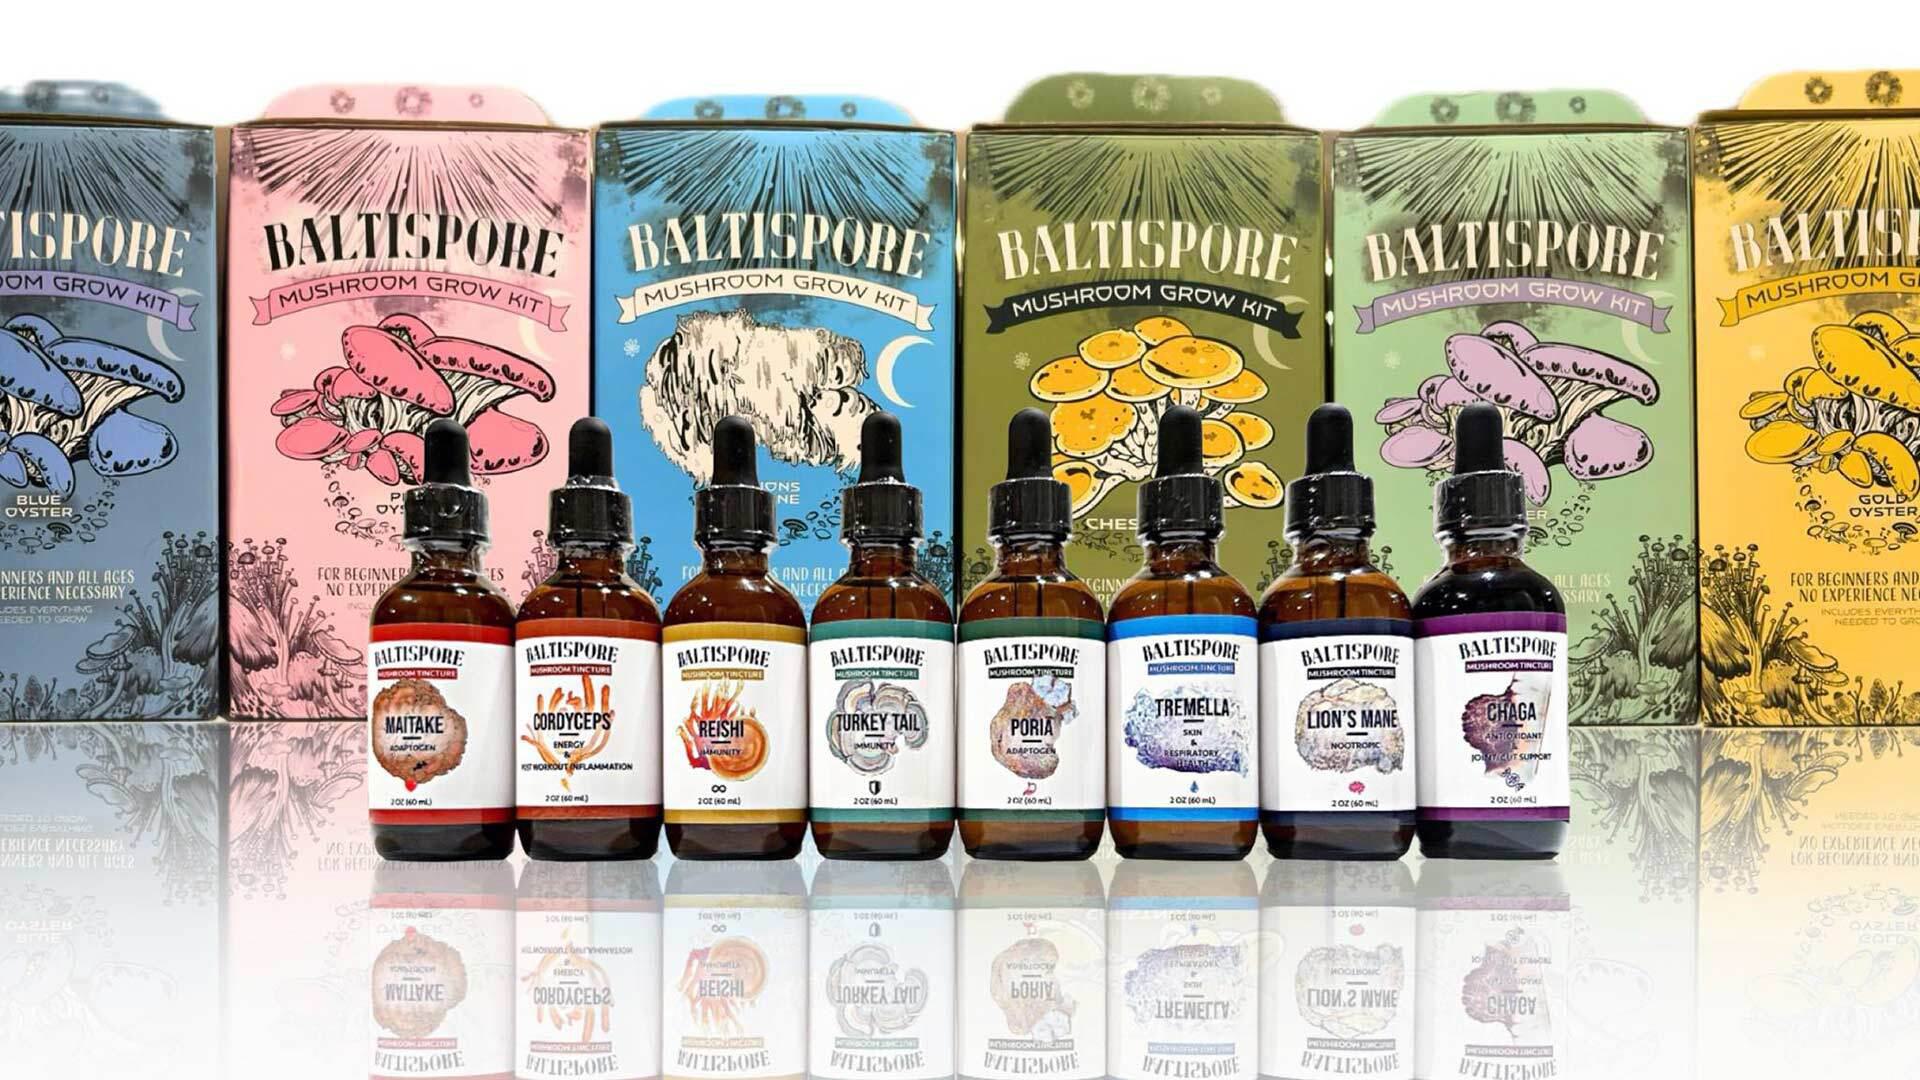 BaltiSpore products